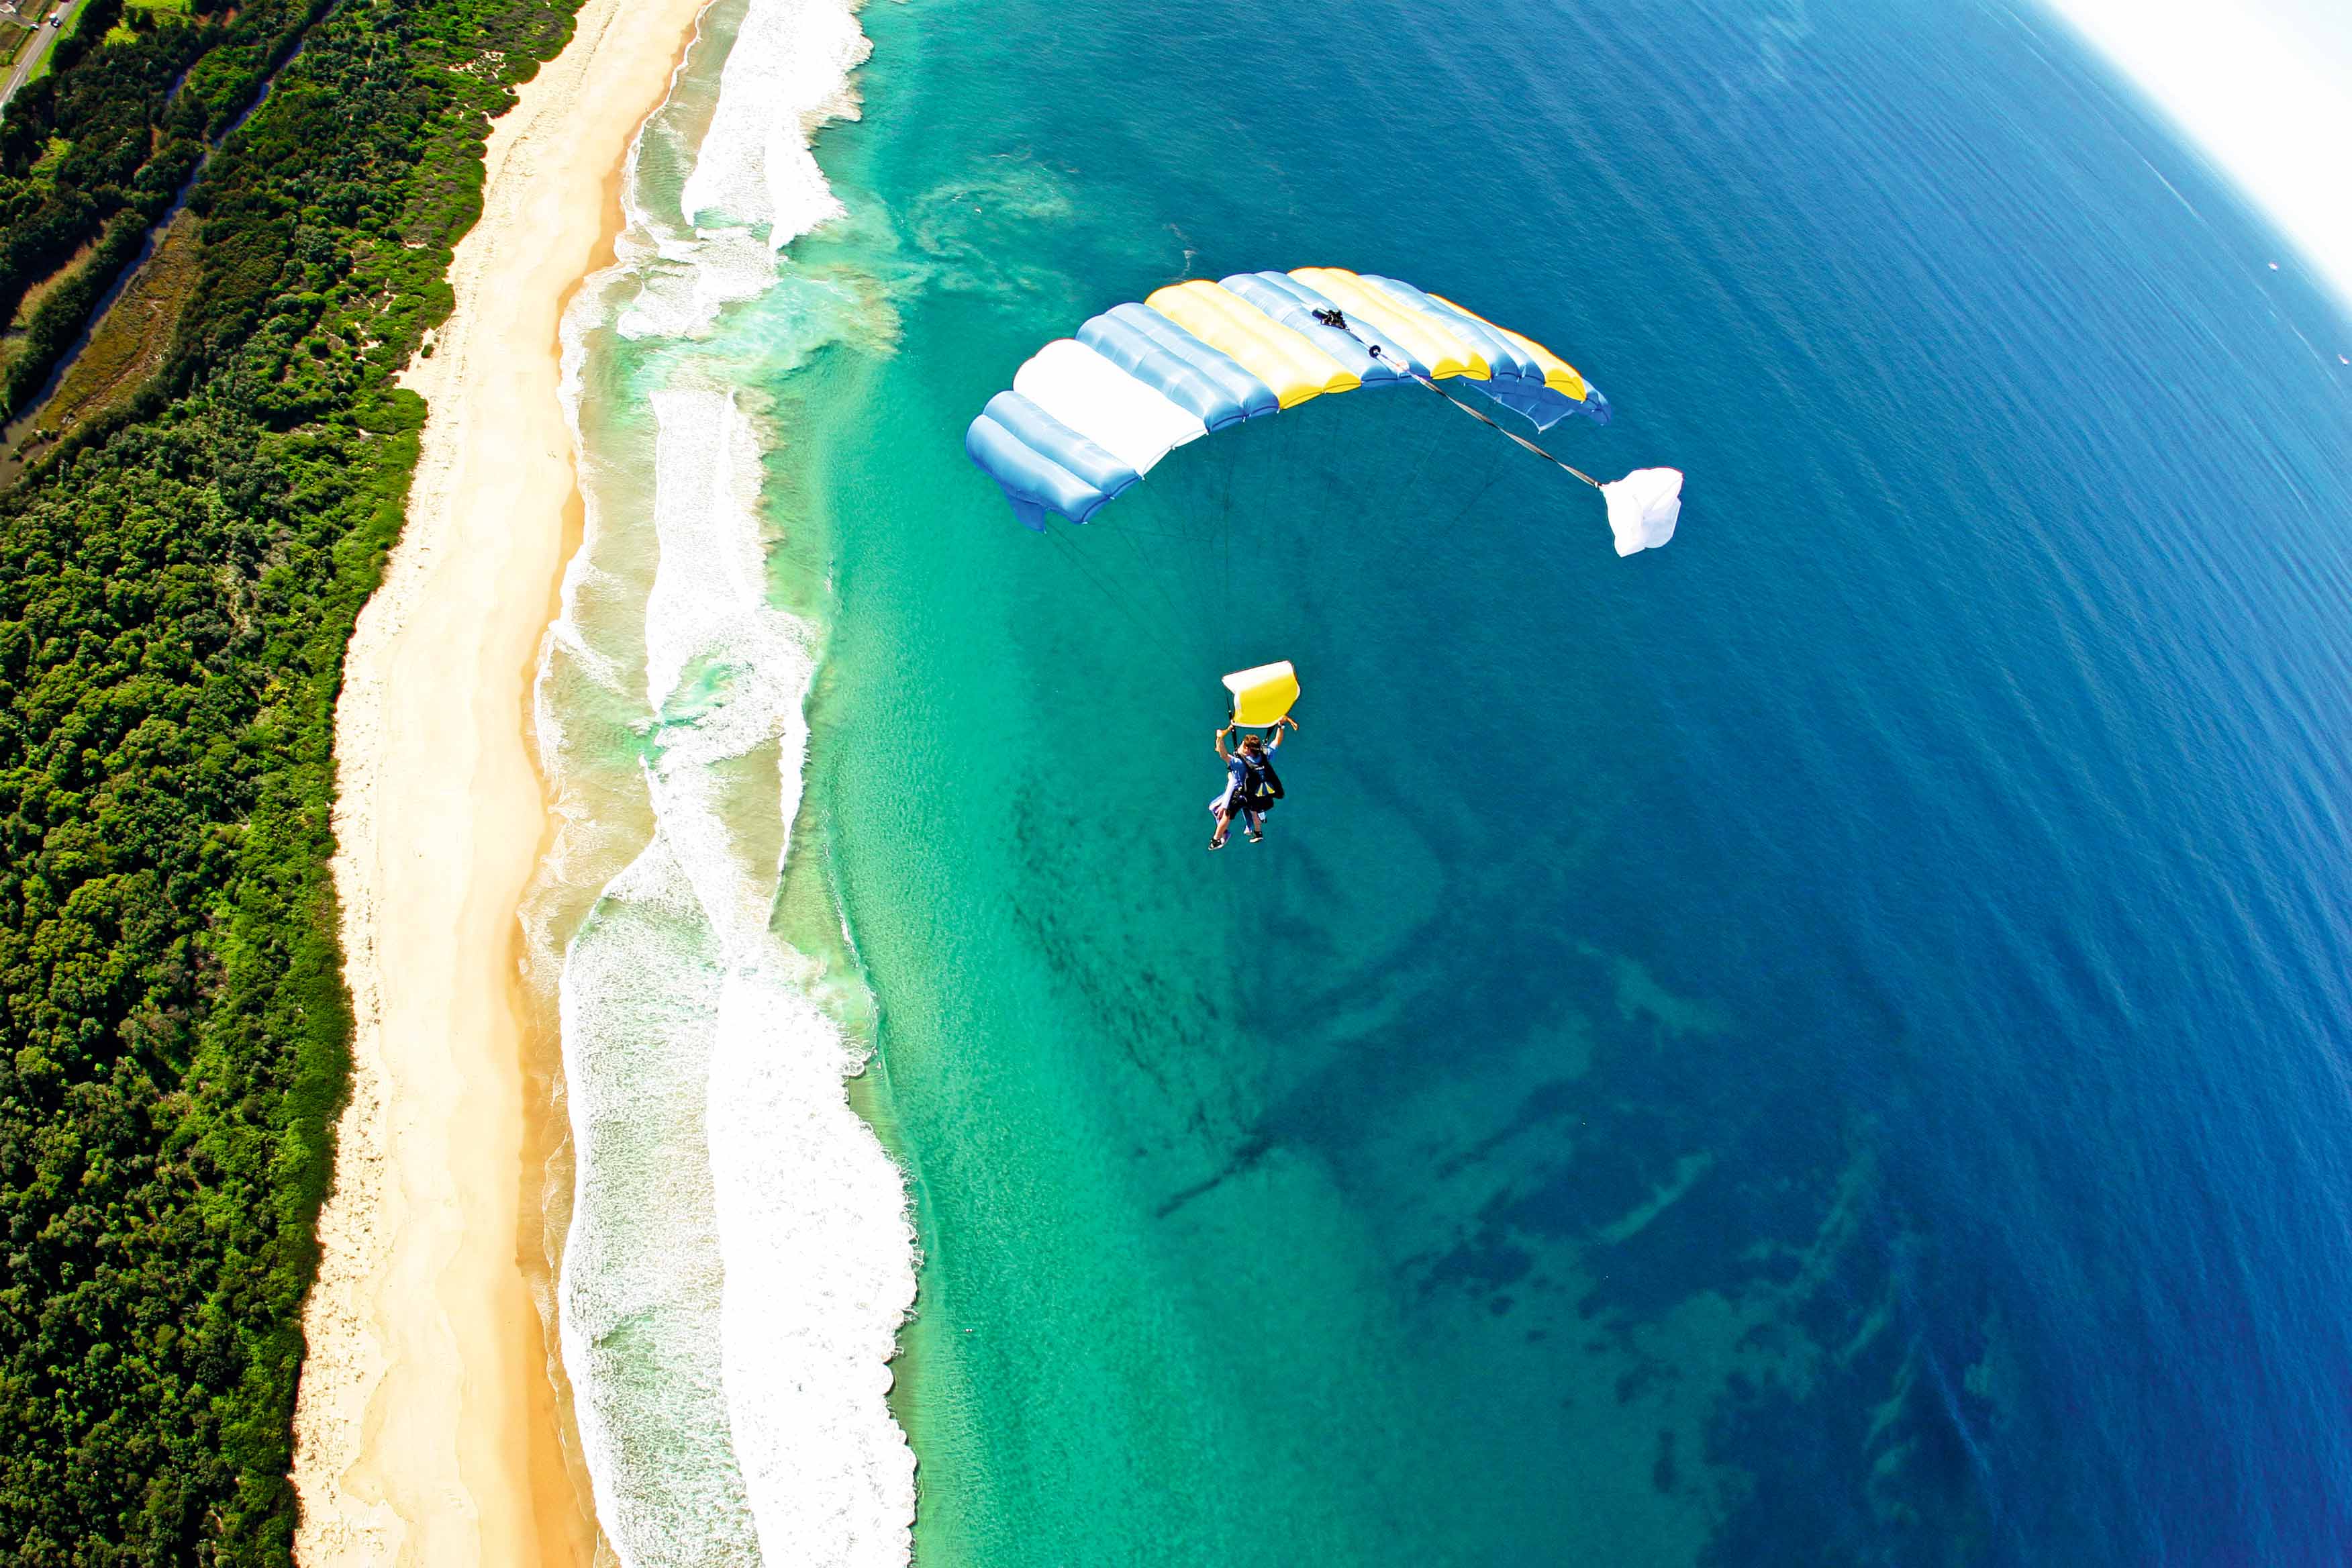 Skydive Sydney- Cruising back to the beach